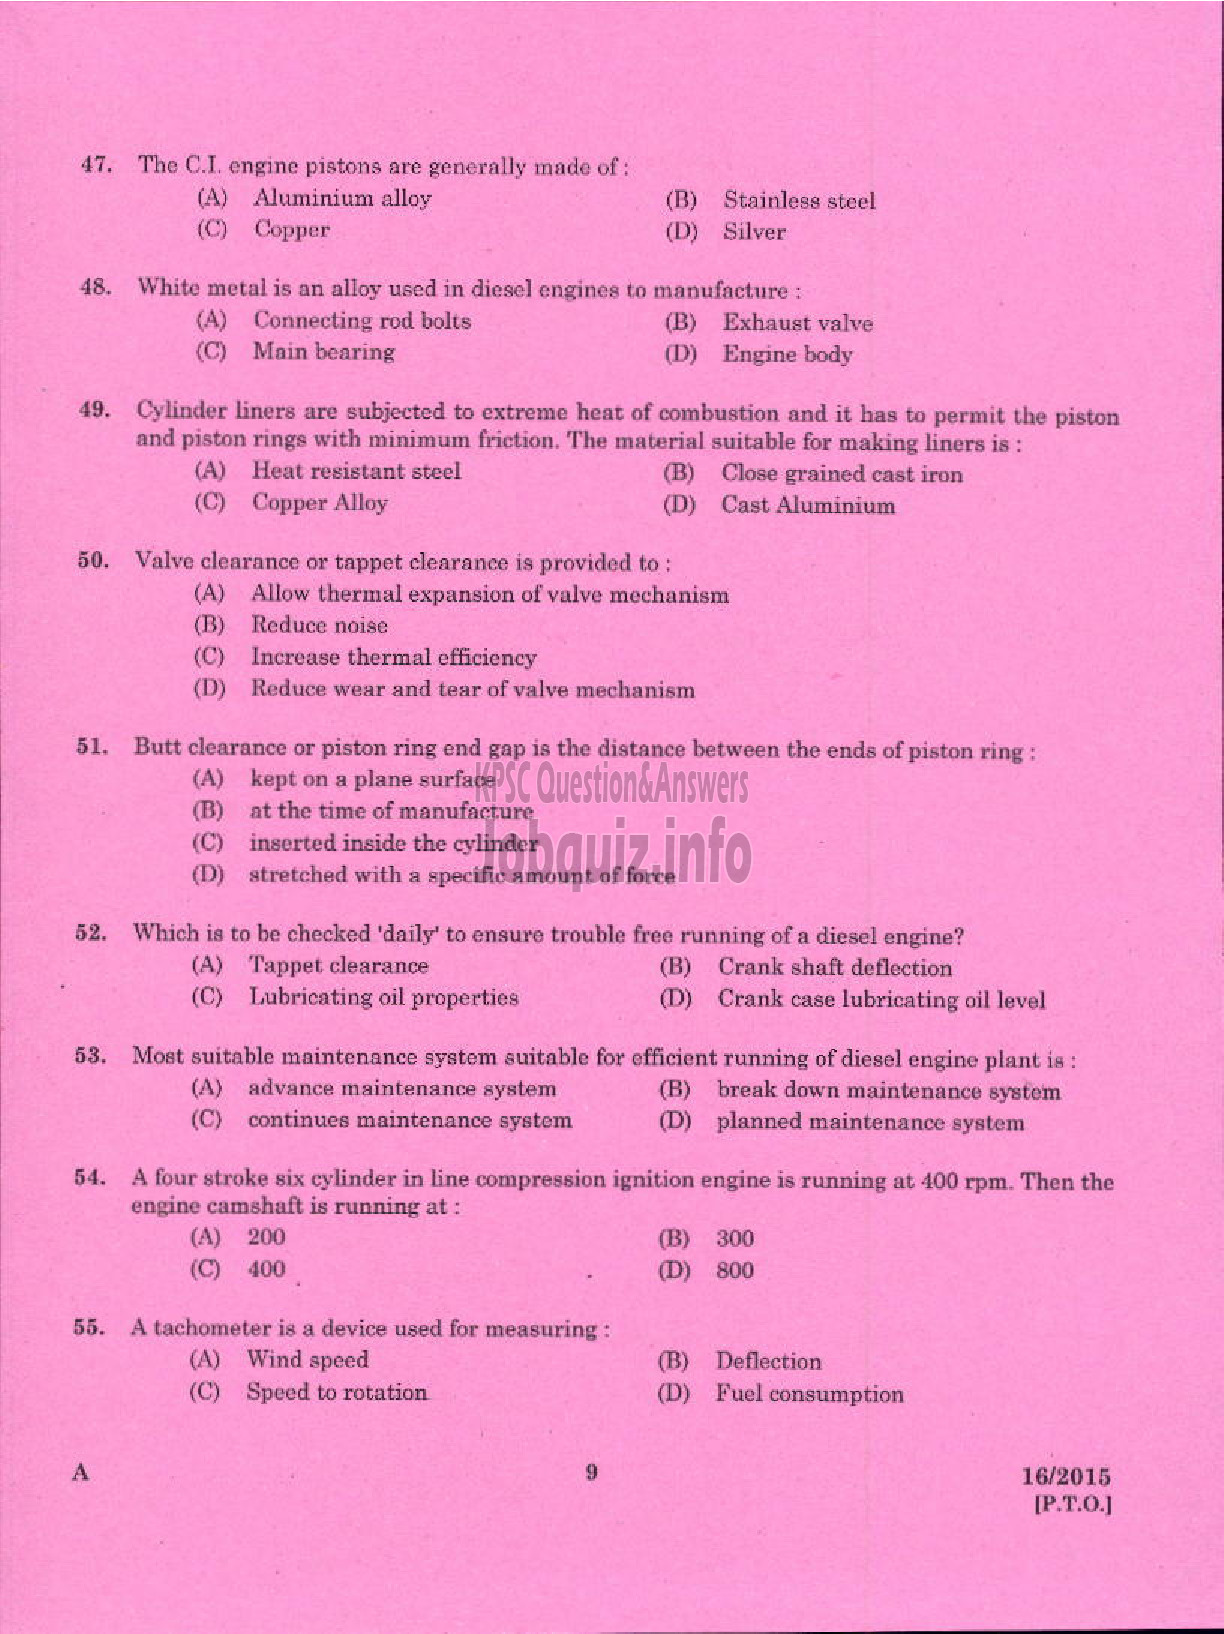 Kerala PSC Question Paper - LABORATORY TECHNICAL ASSISTANT MAINTENANCE AND OPERATION OF MARINE ENGINES VHSE-7